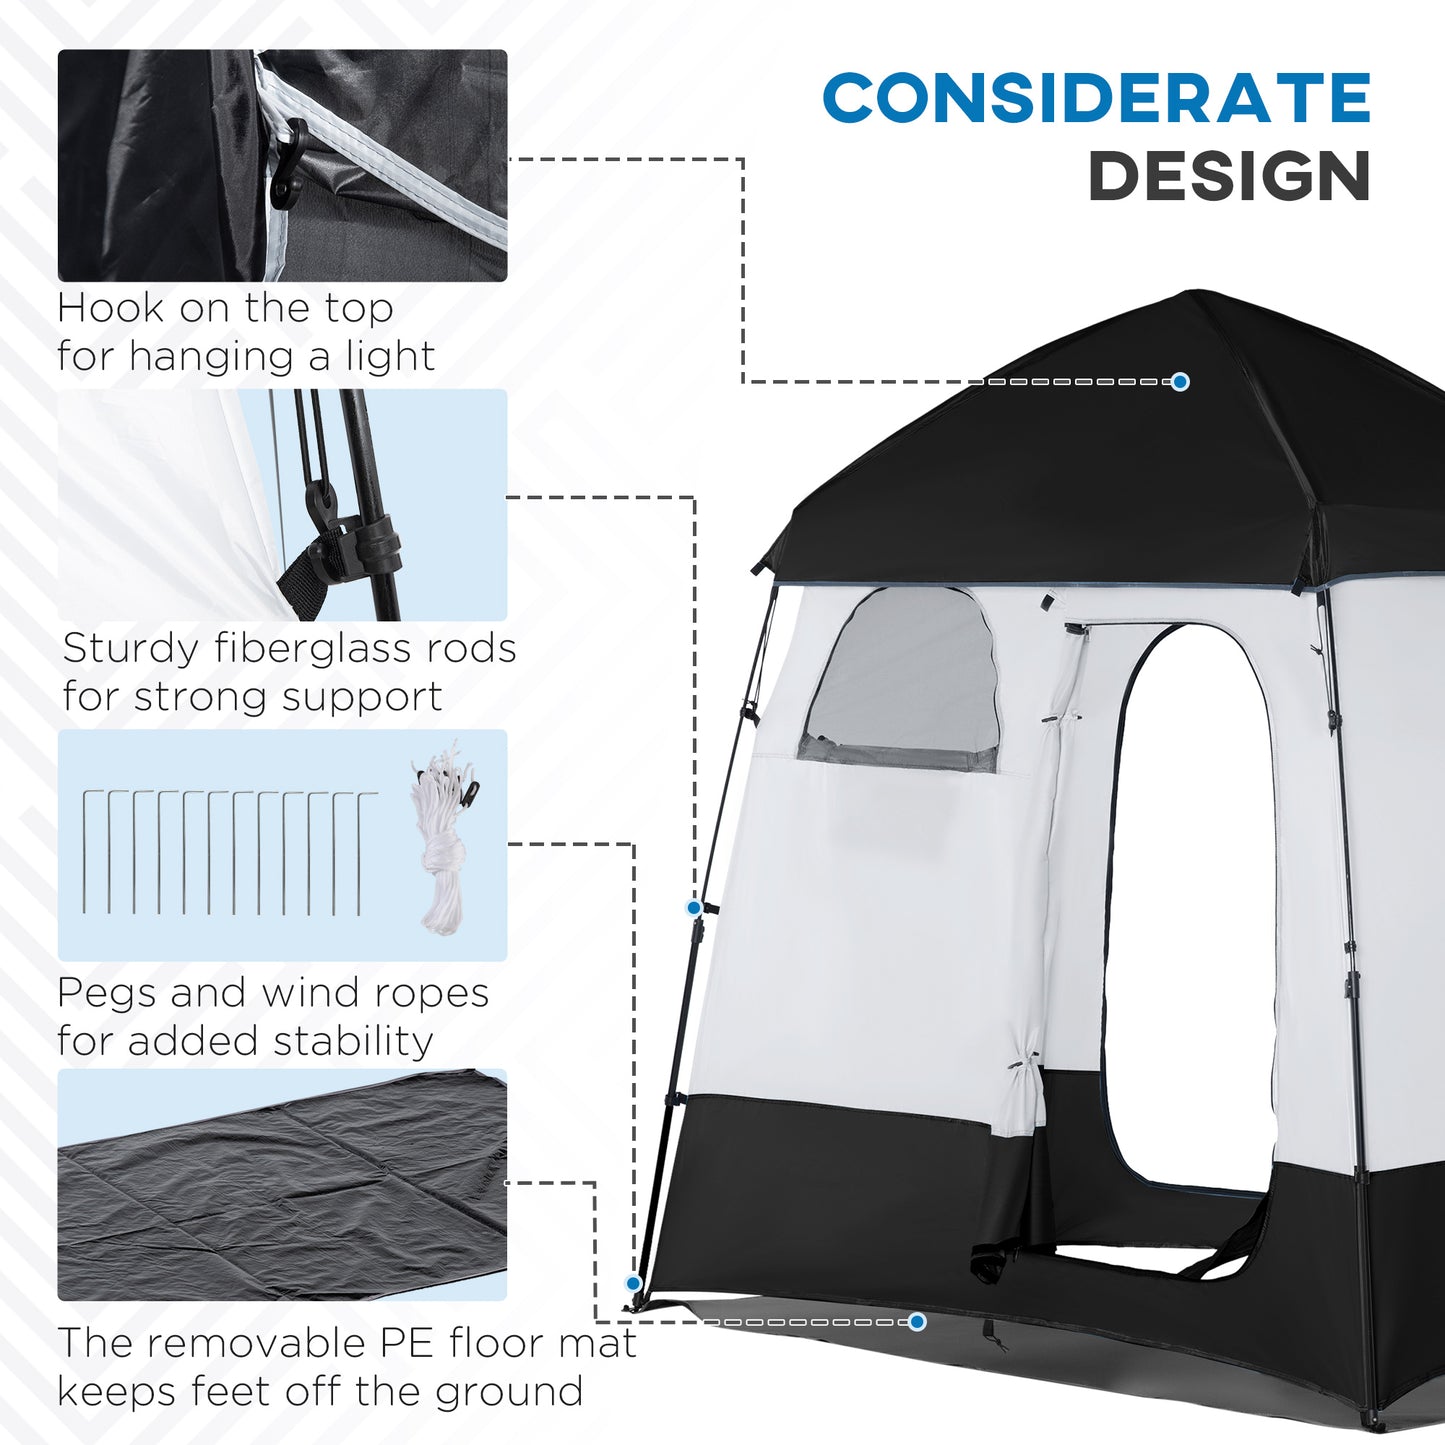 Pop Up Shower Tent, Portable Privacy Shelter for 2 Persons, Changing Room with 2 Windows, 3 Doors, Carrying Bag, Grey and Black at Gallery Canada